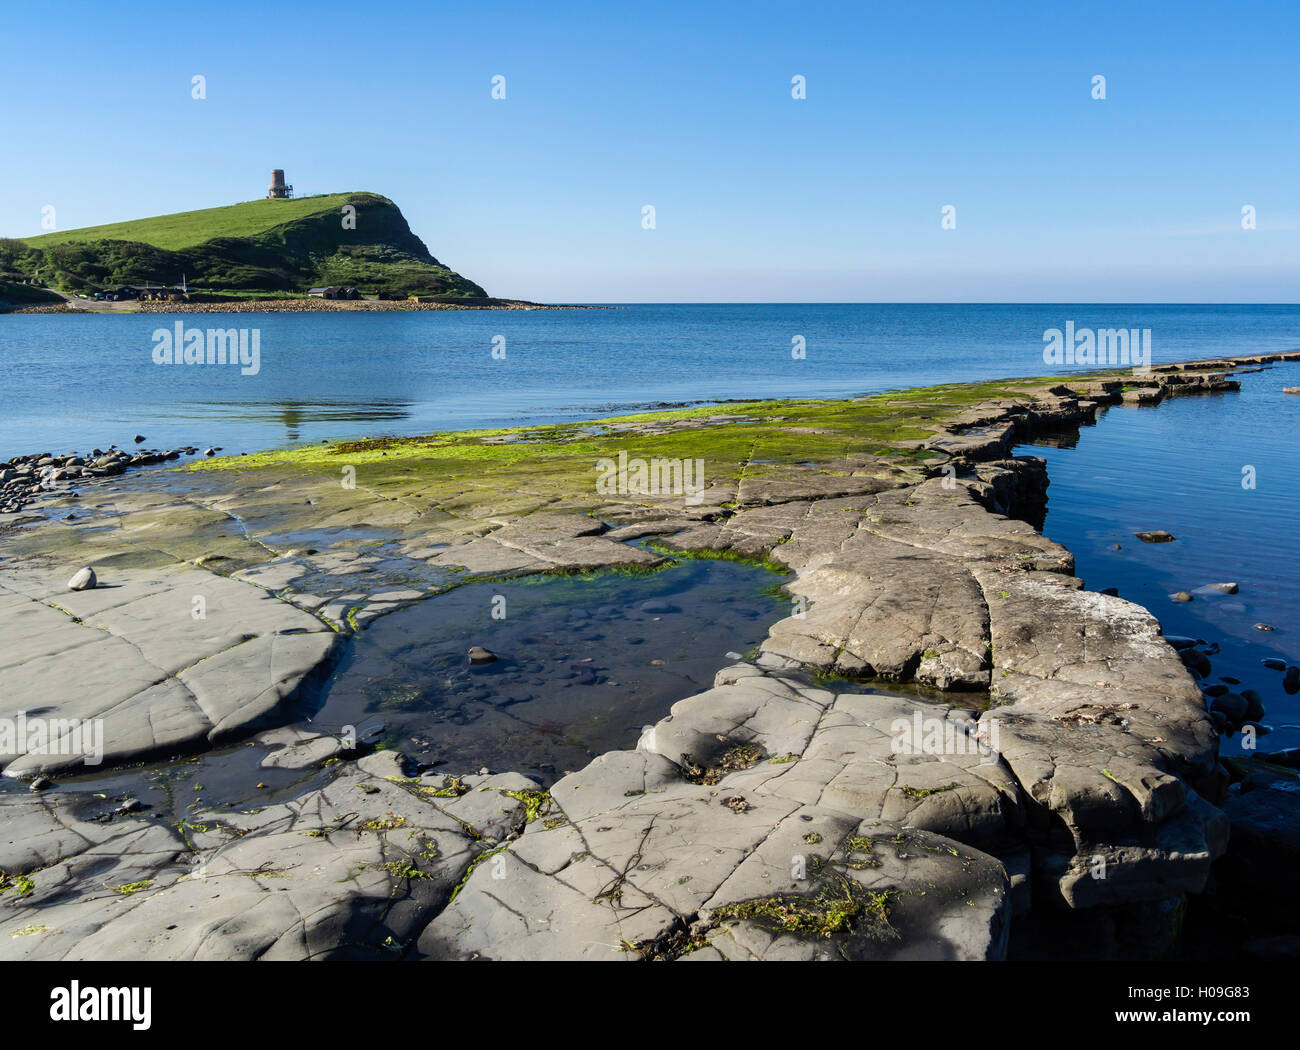 Rock Ledges and Clavell Tower in Kimmeridge Bay, Isle of Purbeck, Jurassic Coast, UNESCO World Heritage Site, Dorset, UK Stock Photo